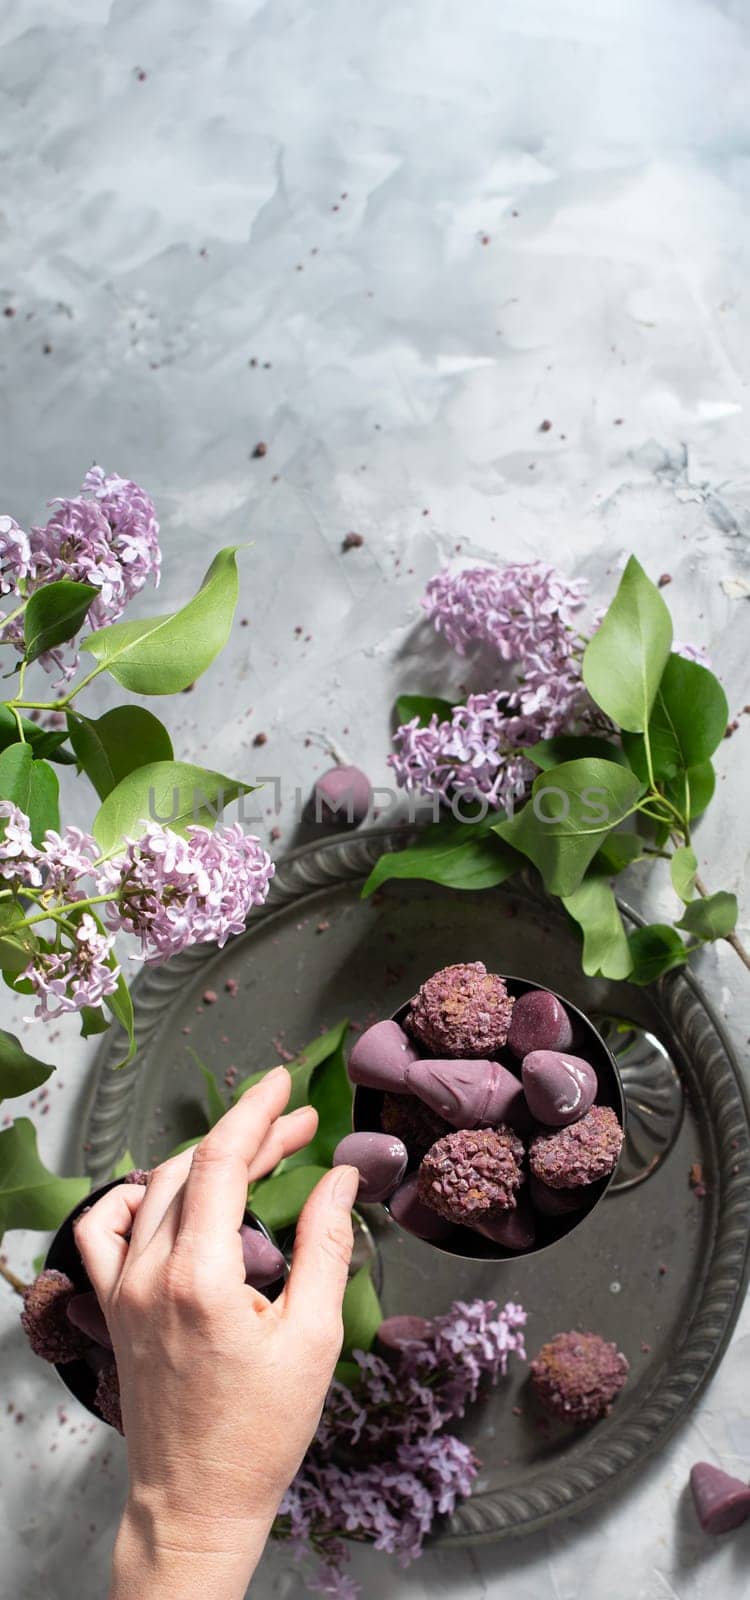 woman's hand takes cuberdon praline from a candy bowl, Belgian sweets in glasses, spring still life with a lilac branch by KaterinaDalemans